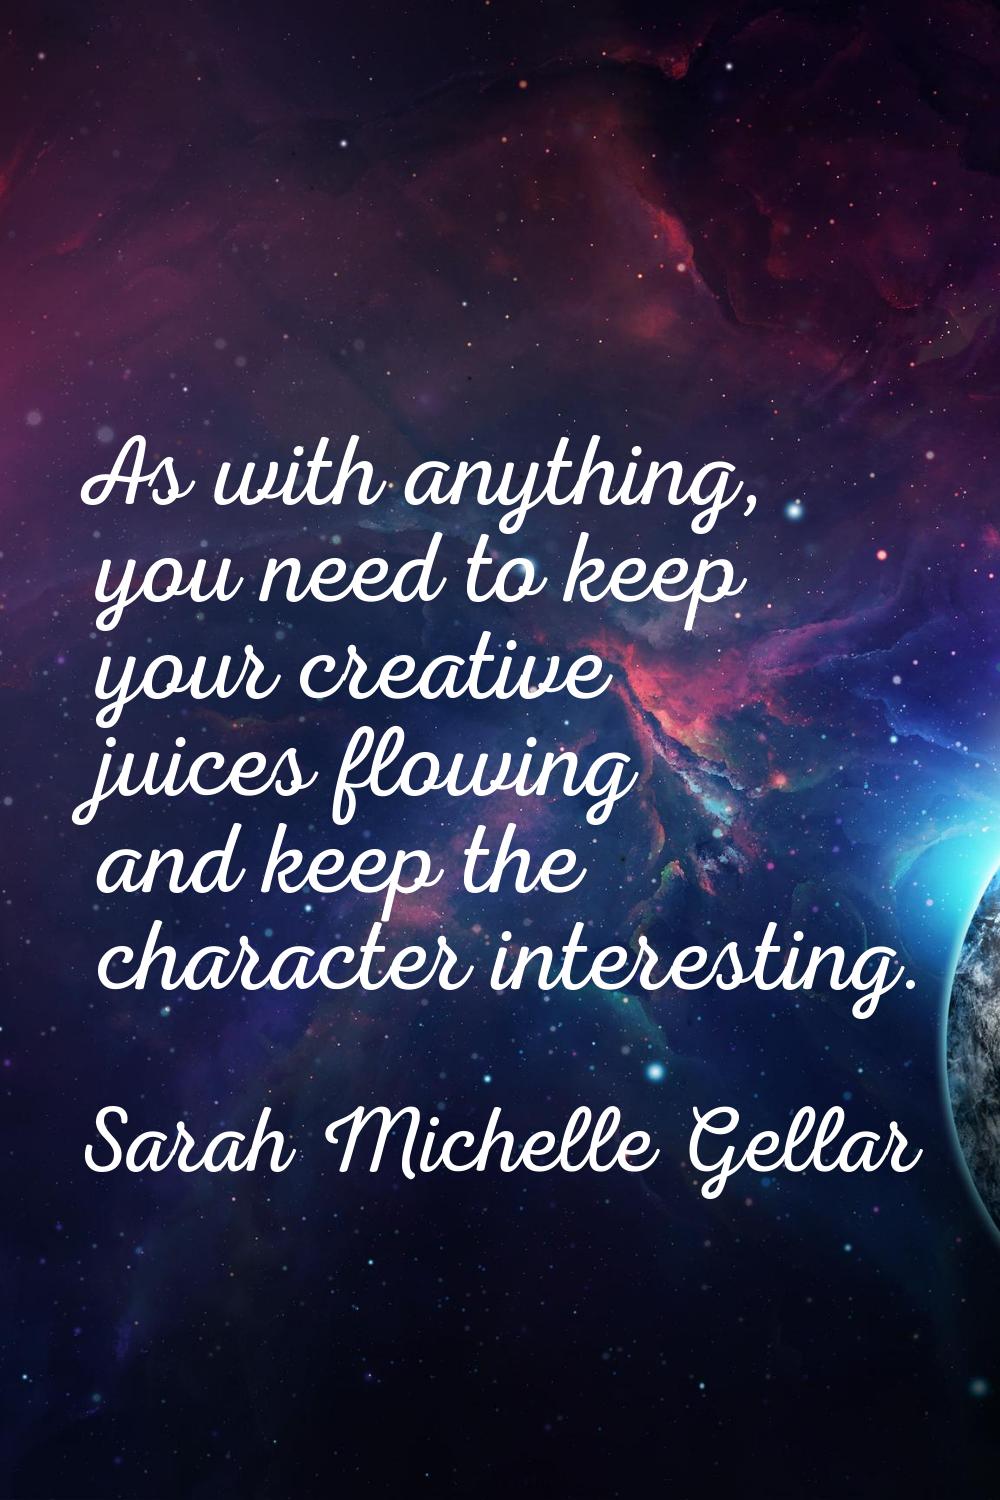 As with anything, you need to keep your creative juices flowing and keep the character interesting.